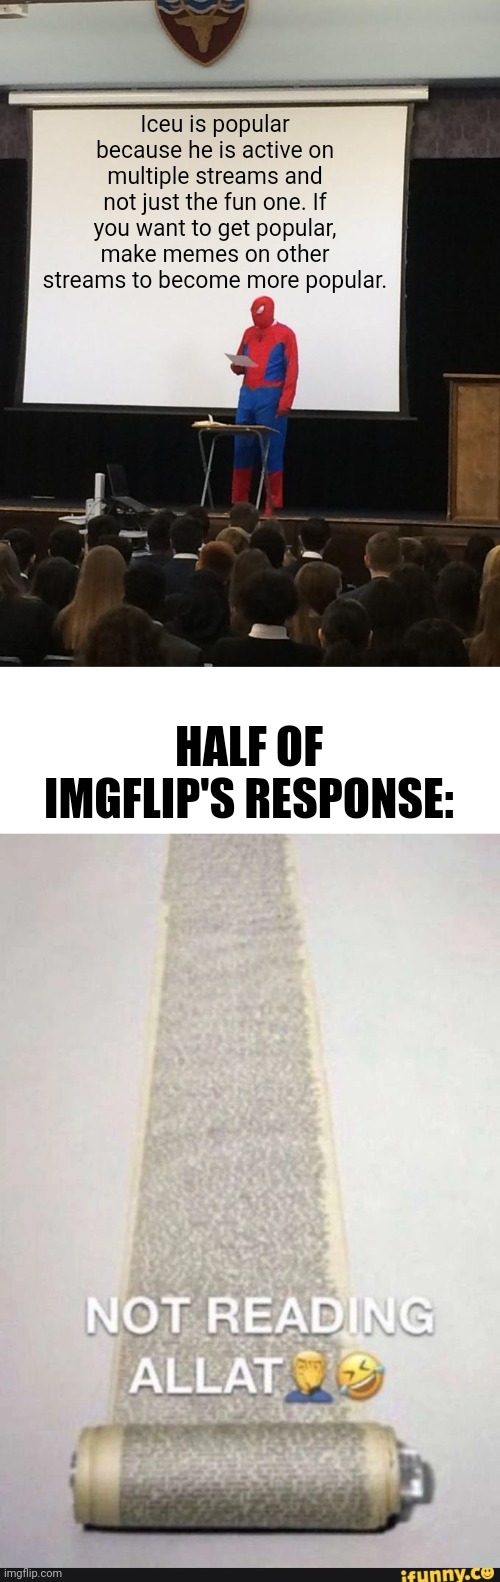 Ok but seriously if you guys want to get popular, don't just post in the fun stream. | Iceu is popular because he is active on multiple streams and not just the fun one. If you want to get popular, make memes on other streams to become more popular. HALF OF IMGFLIP'S RESPONSE: | image tagged in spiderman presentation,memes,iceu,popular,popularity | made w/ Imgflip meme maker